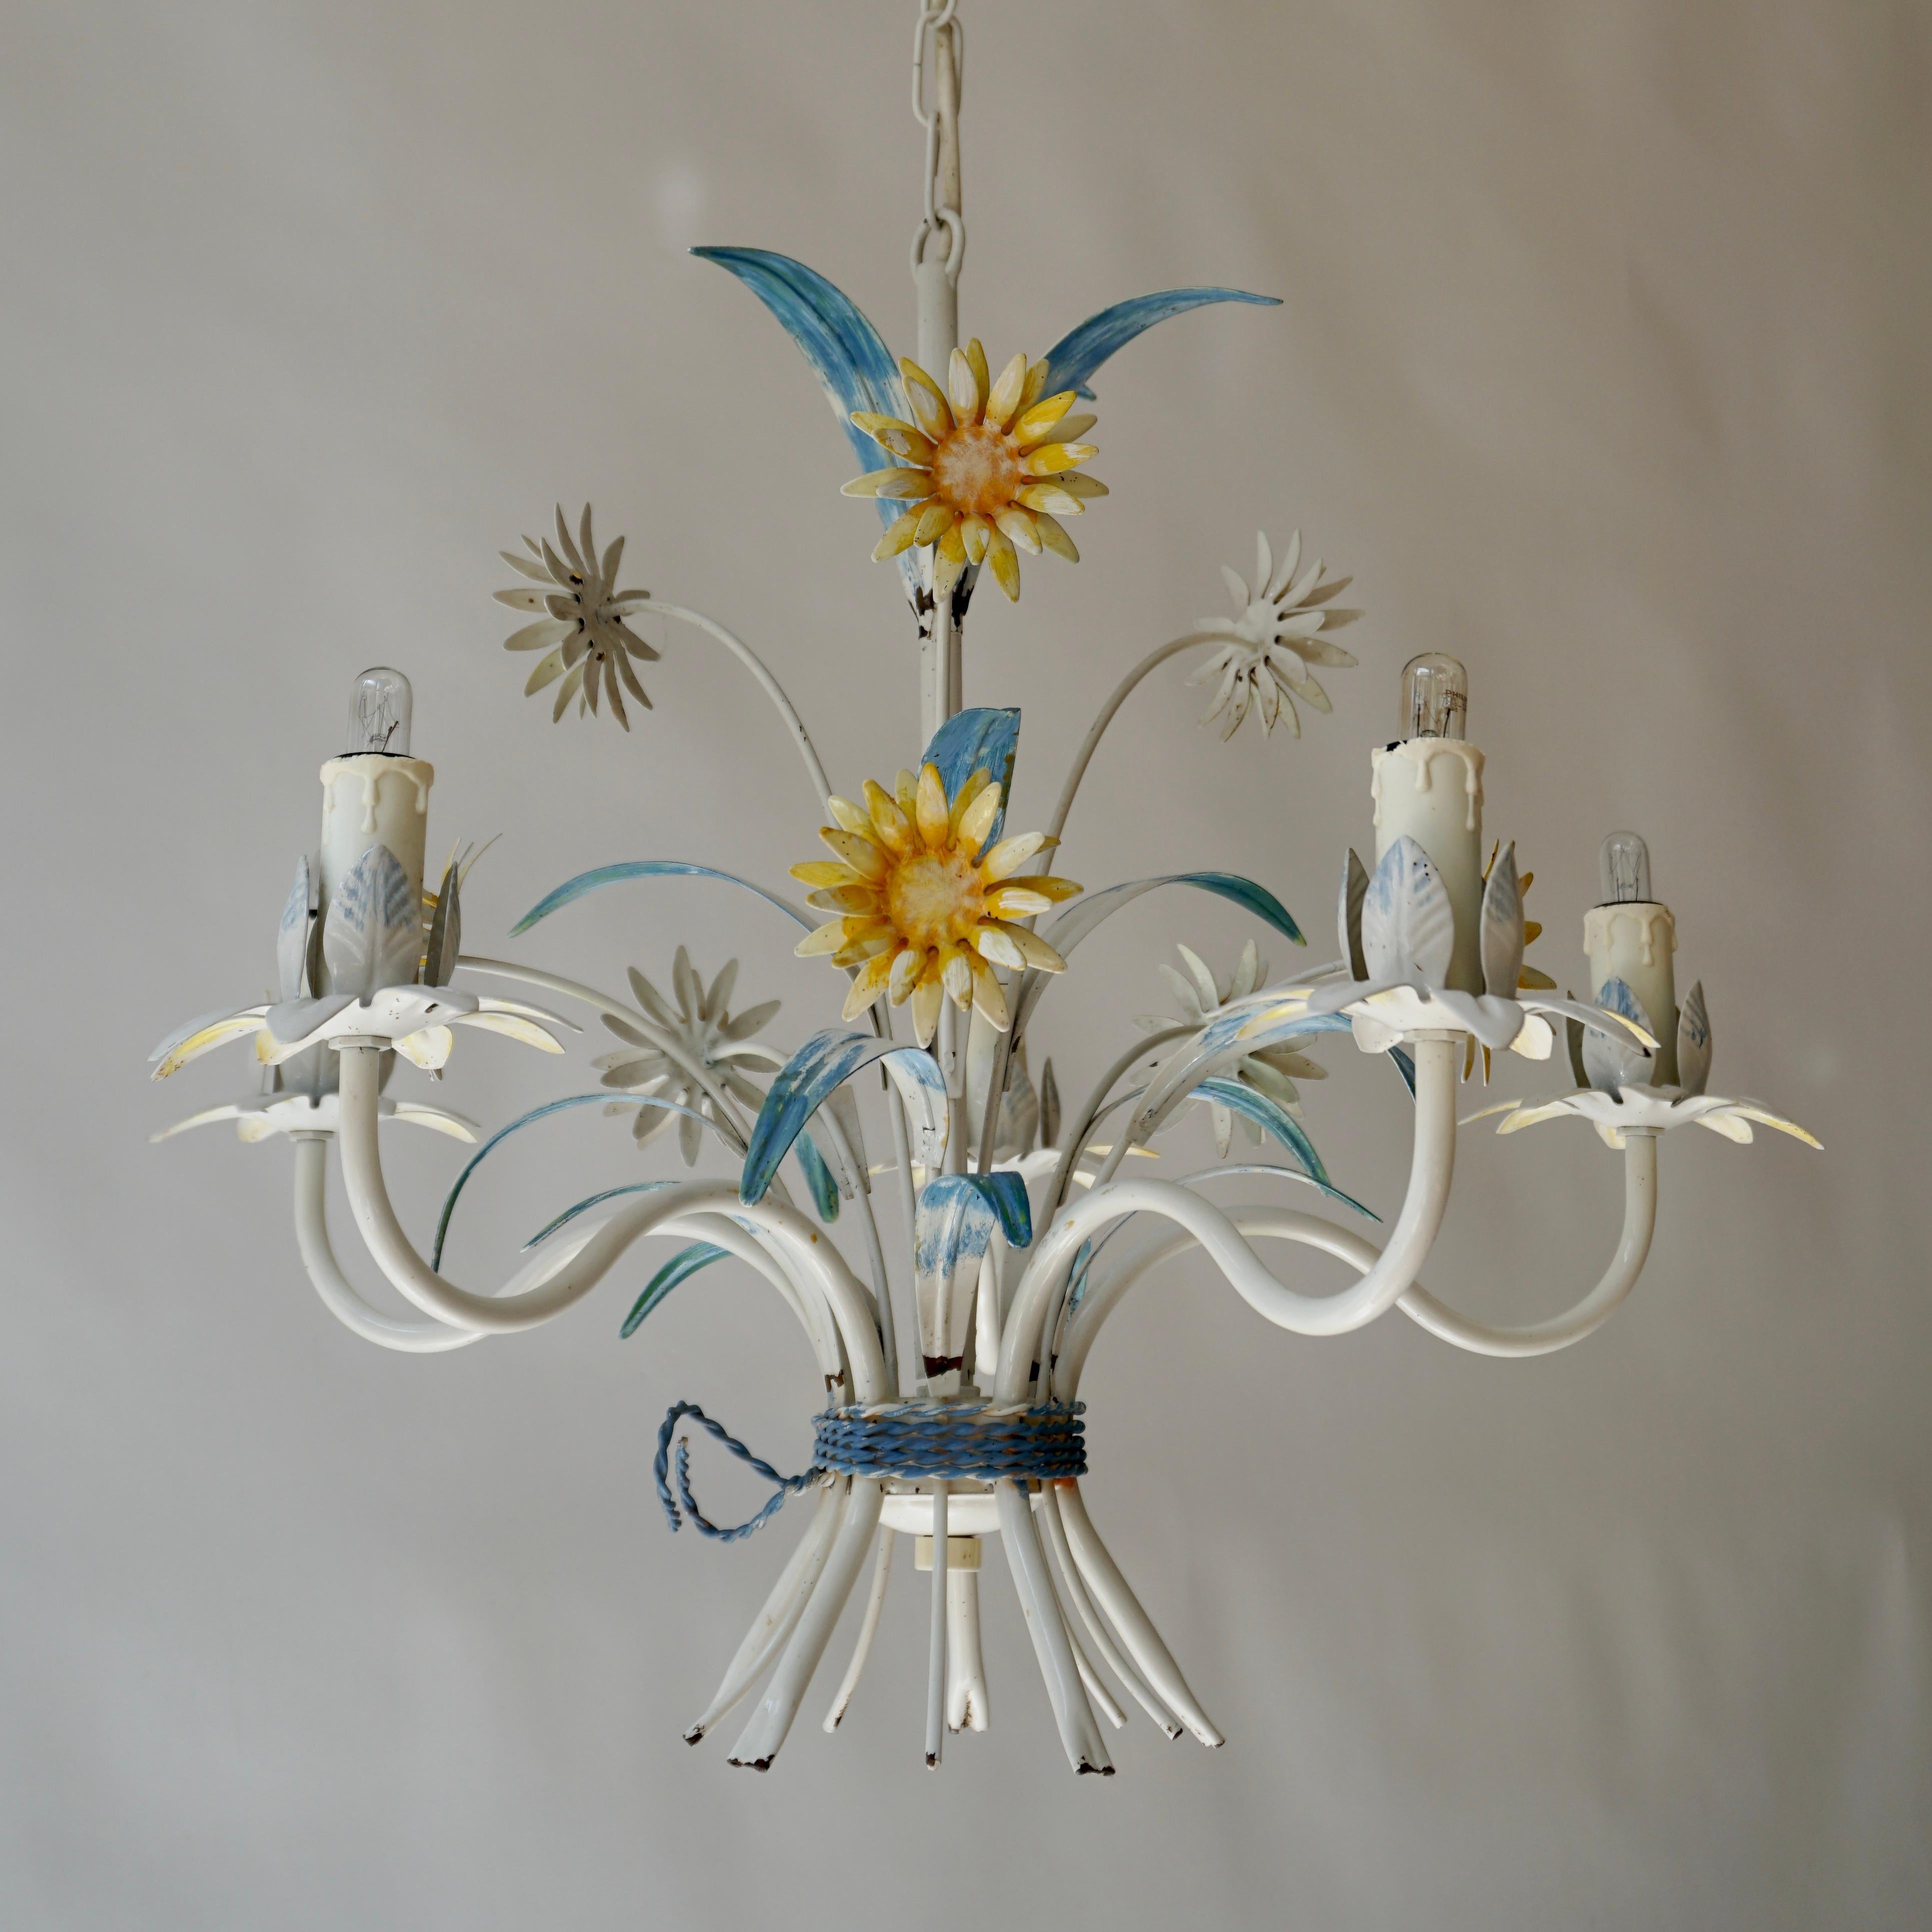 Metal Mid-Century Painted Tôle 5-Arm Light Fixture with Yellow Flowers For Sale